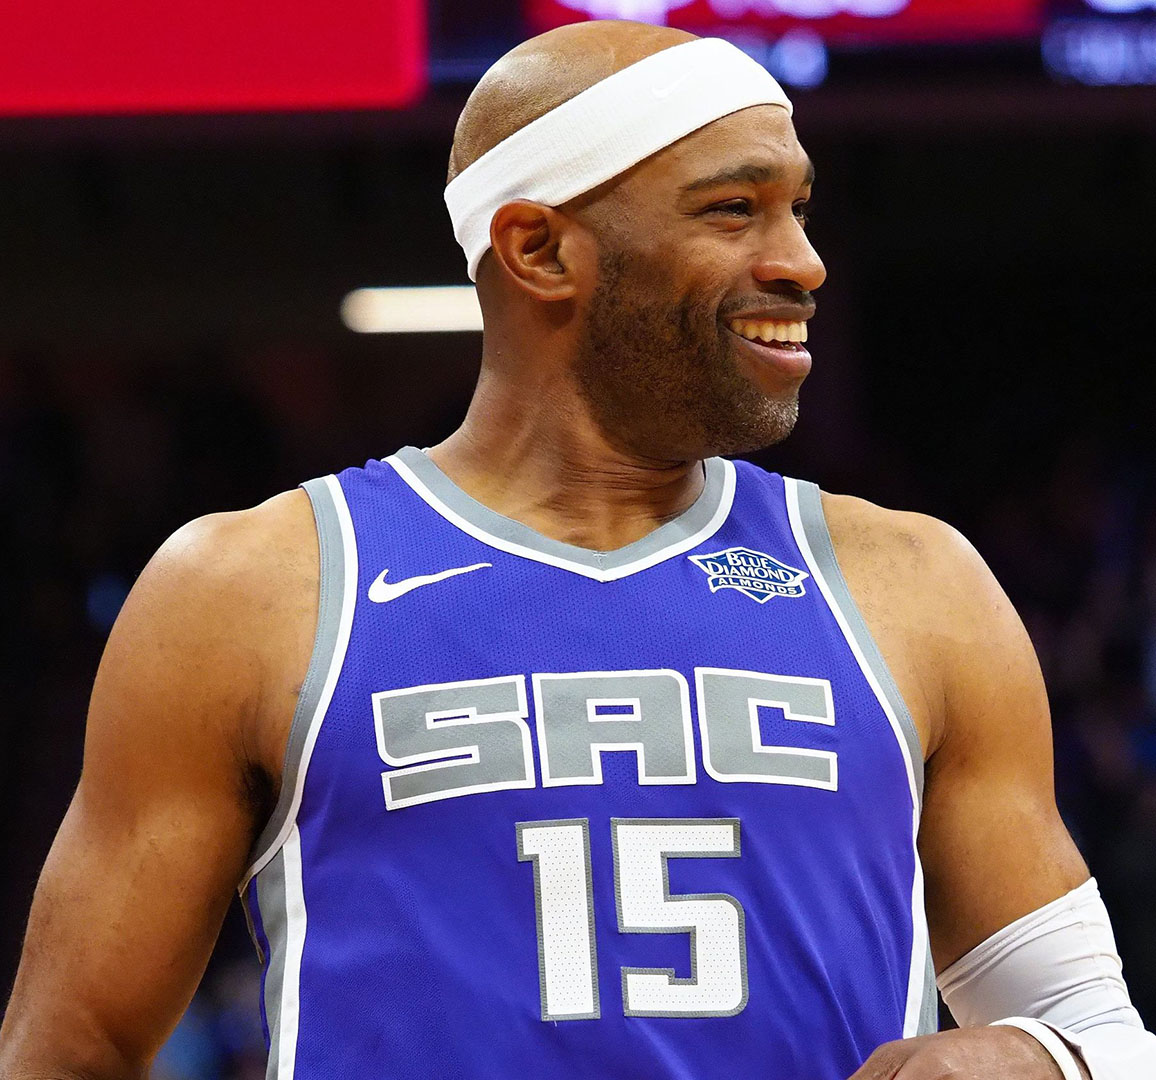 Vince Carter agrees with Hawks for 21st season, per reports